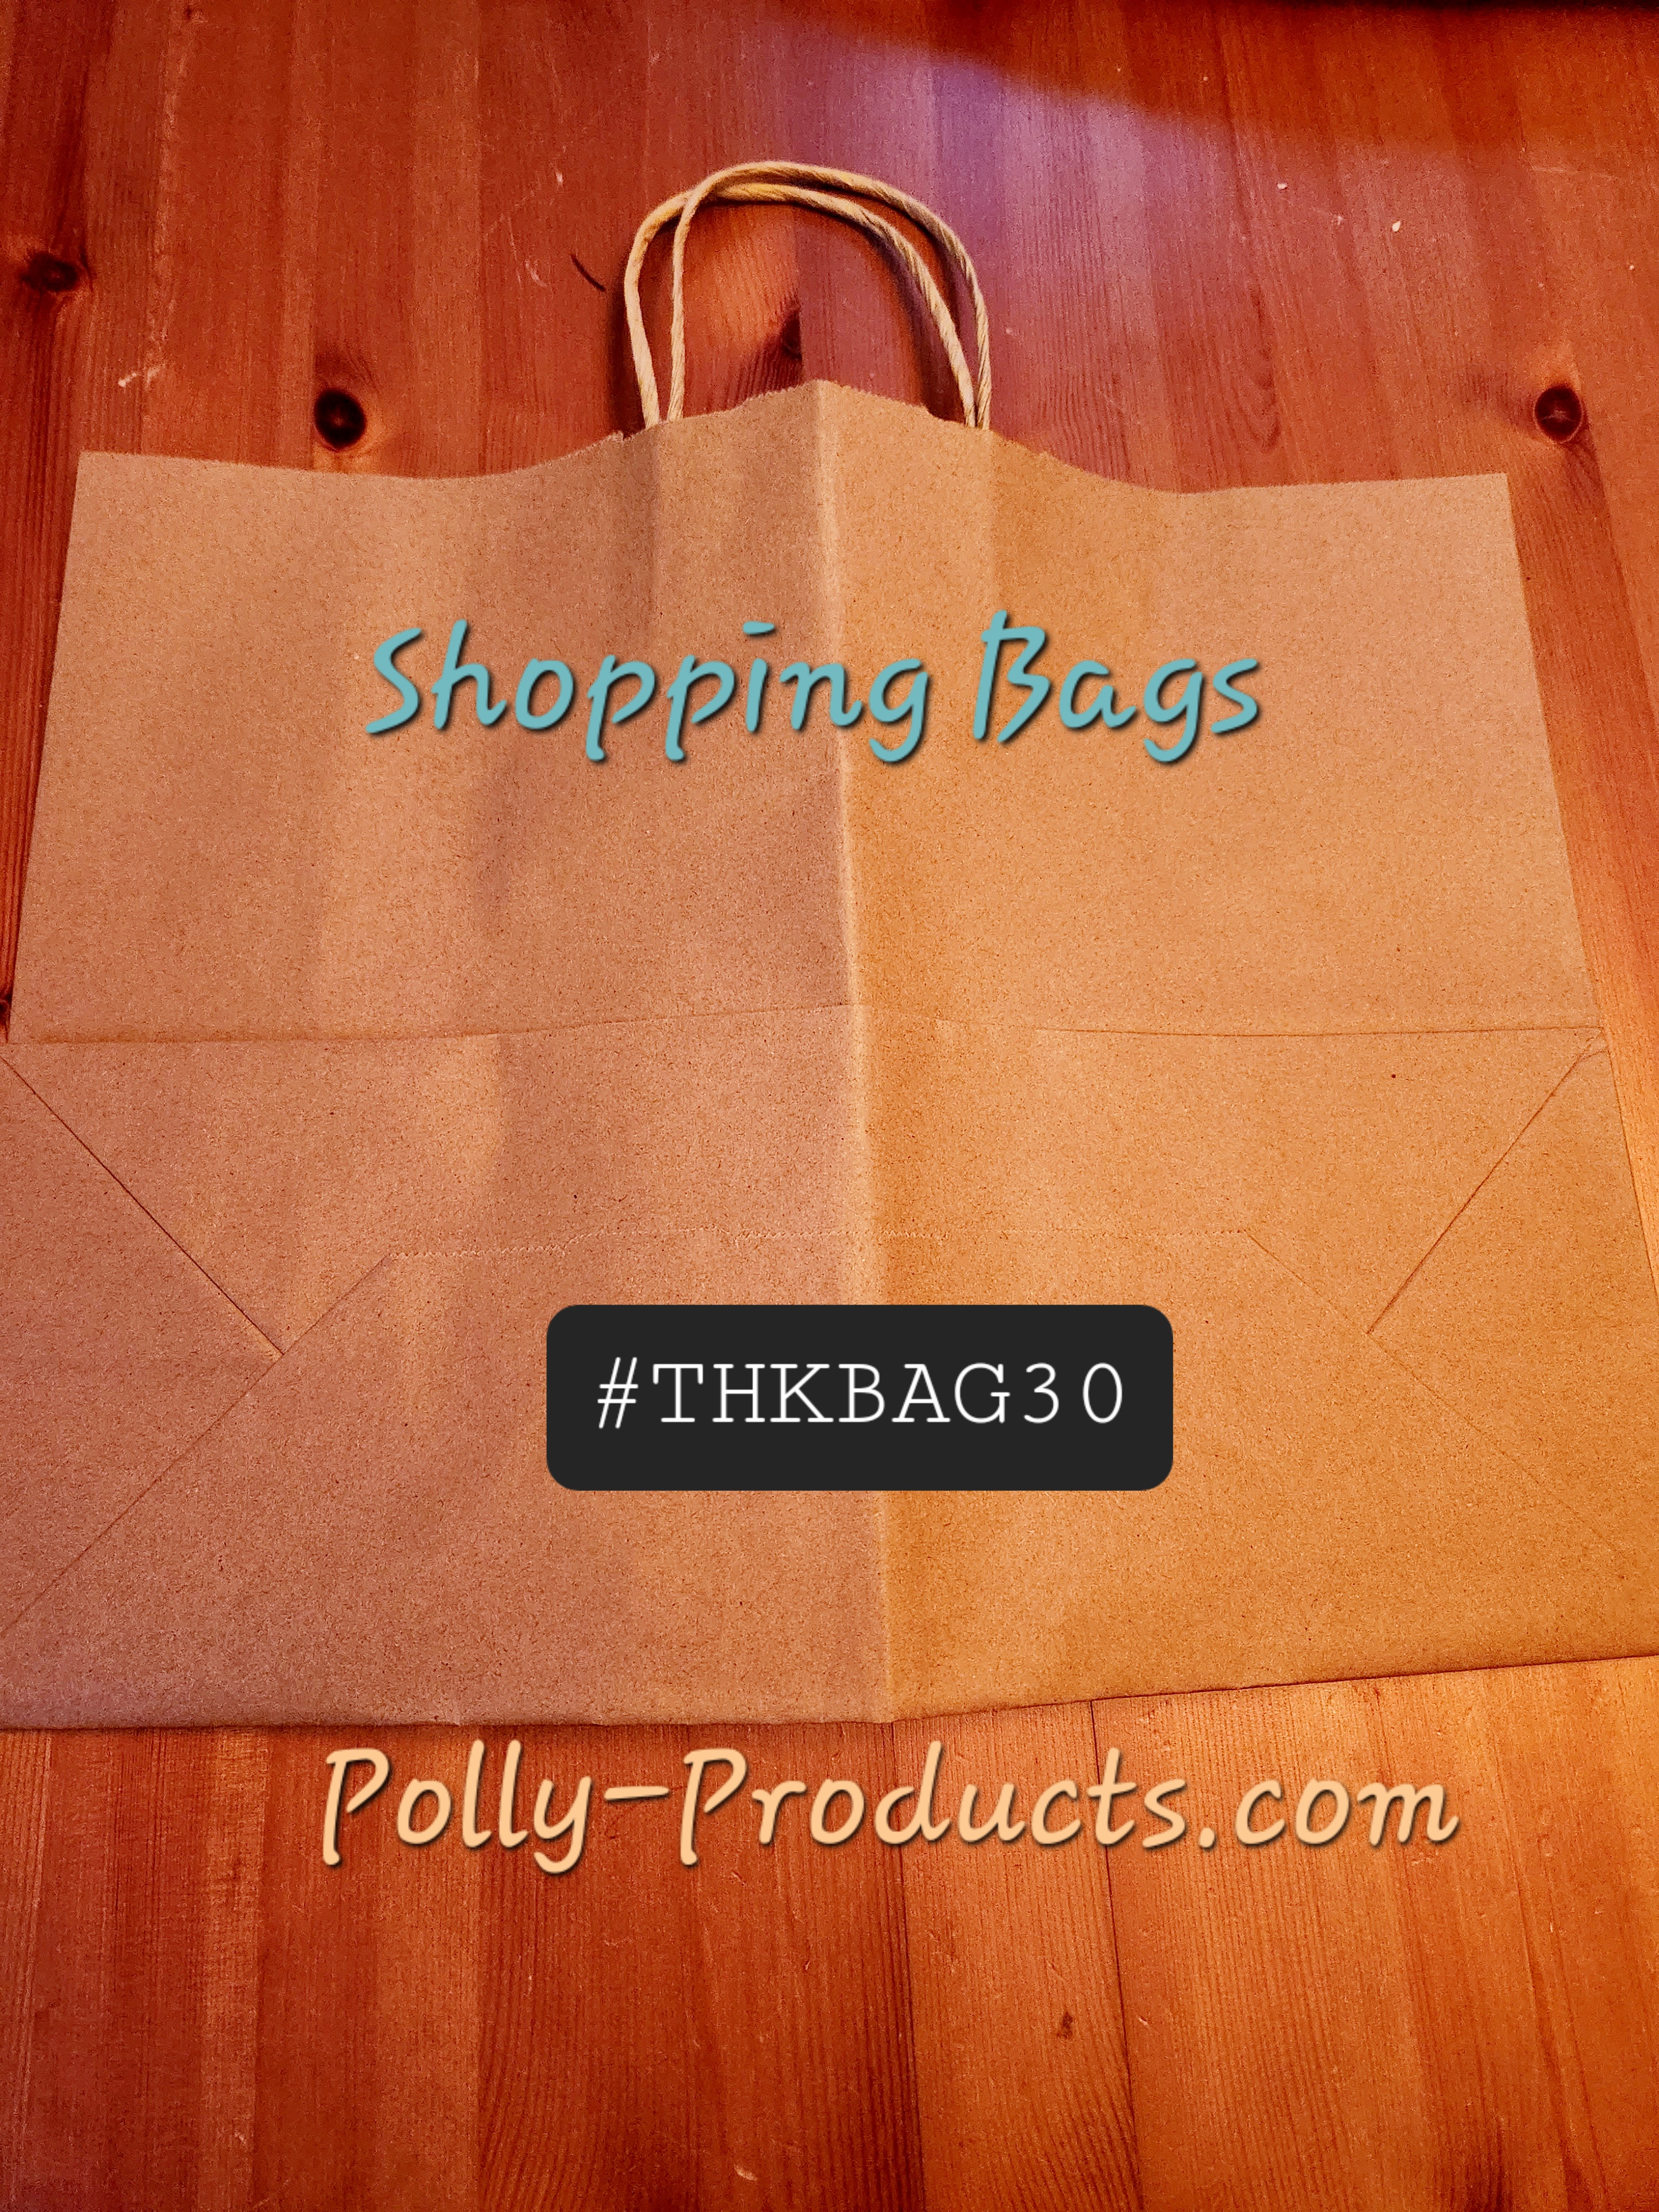 Shopping Bags Polly Products #THKBAG30